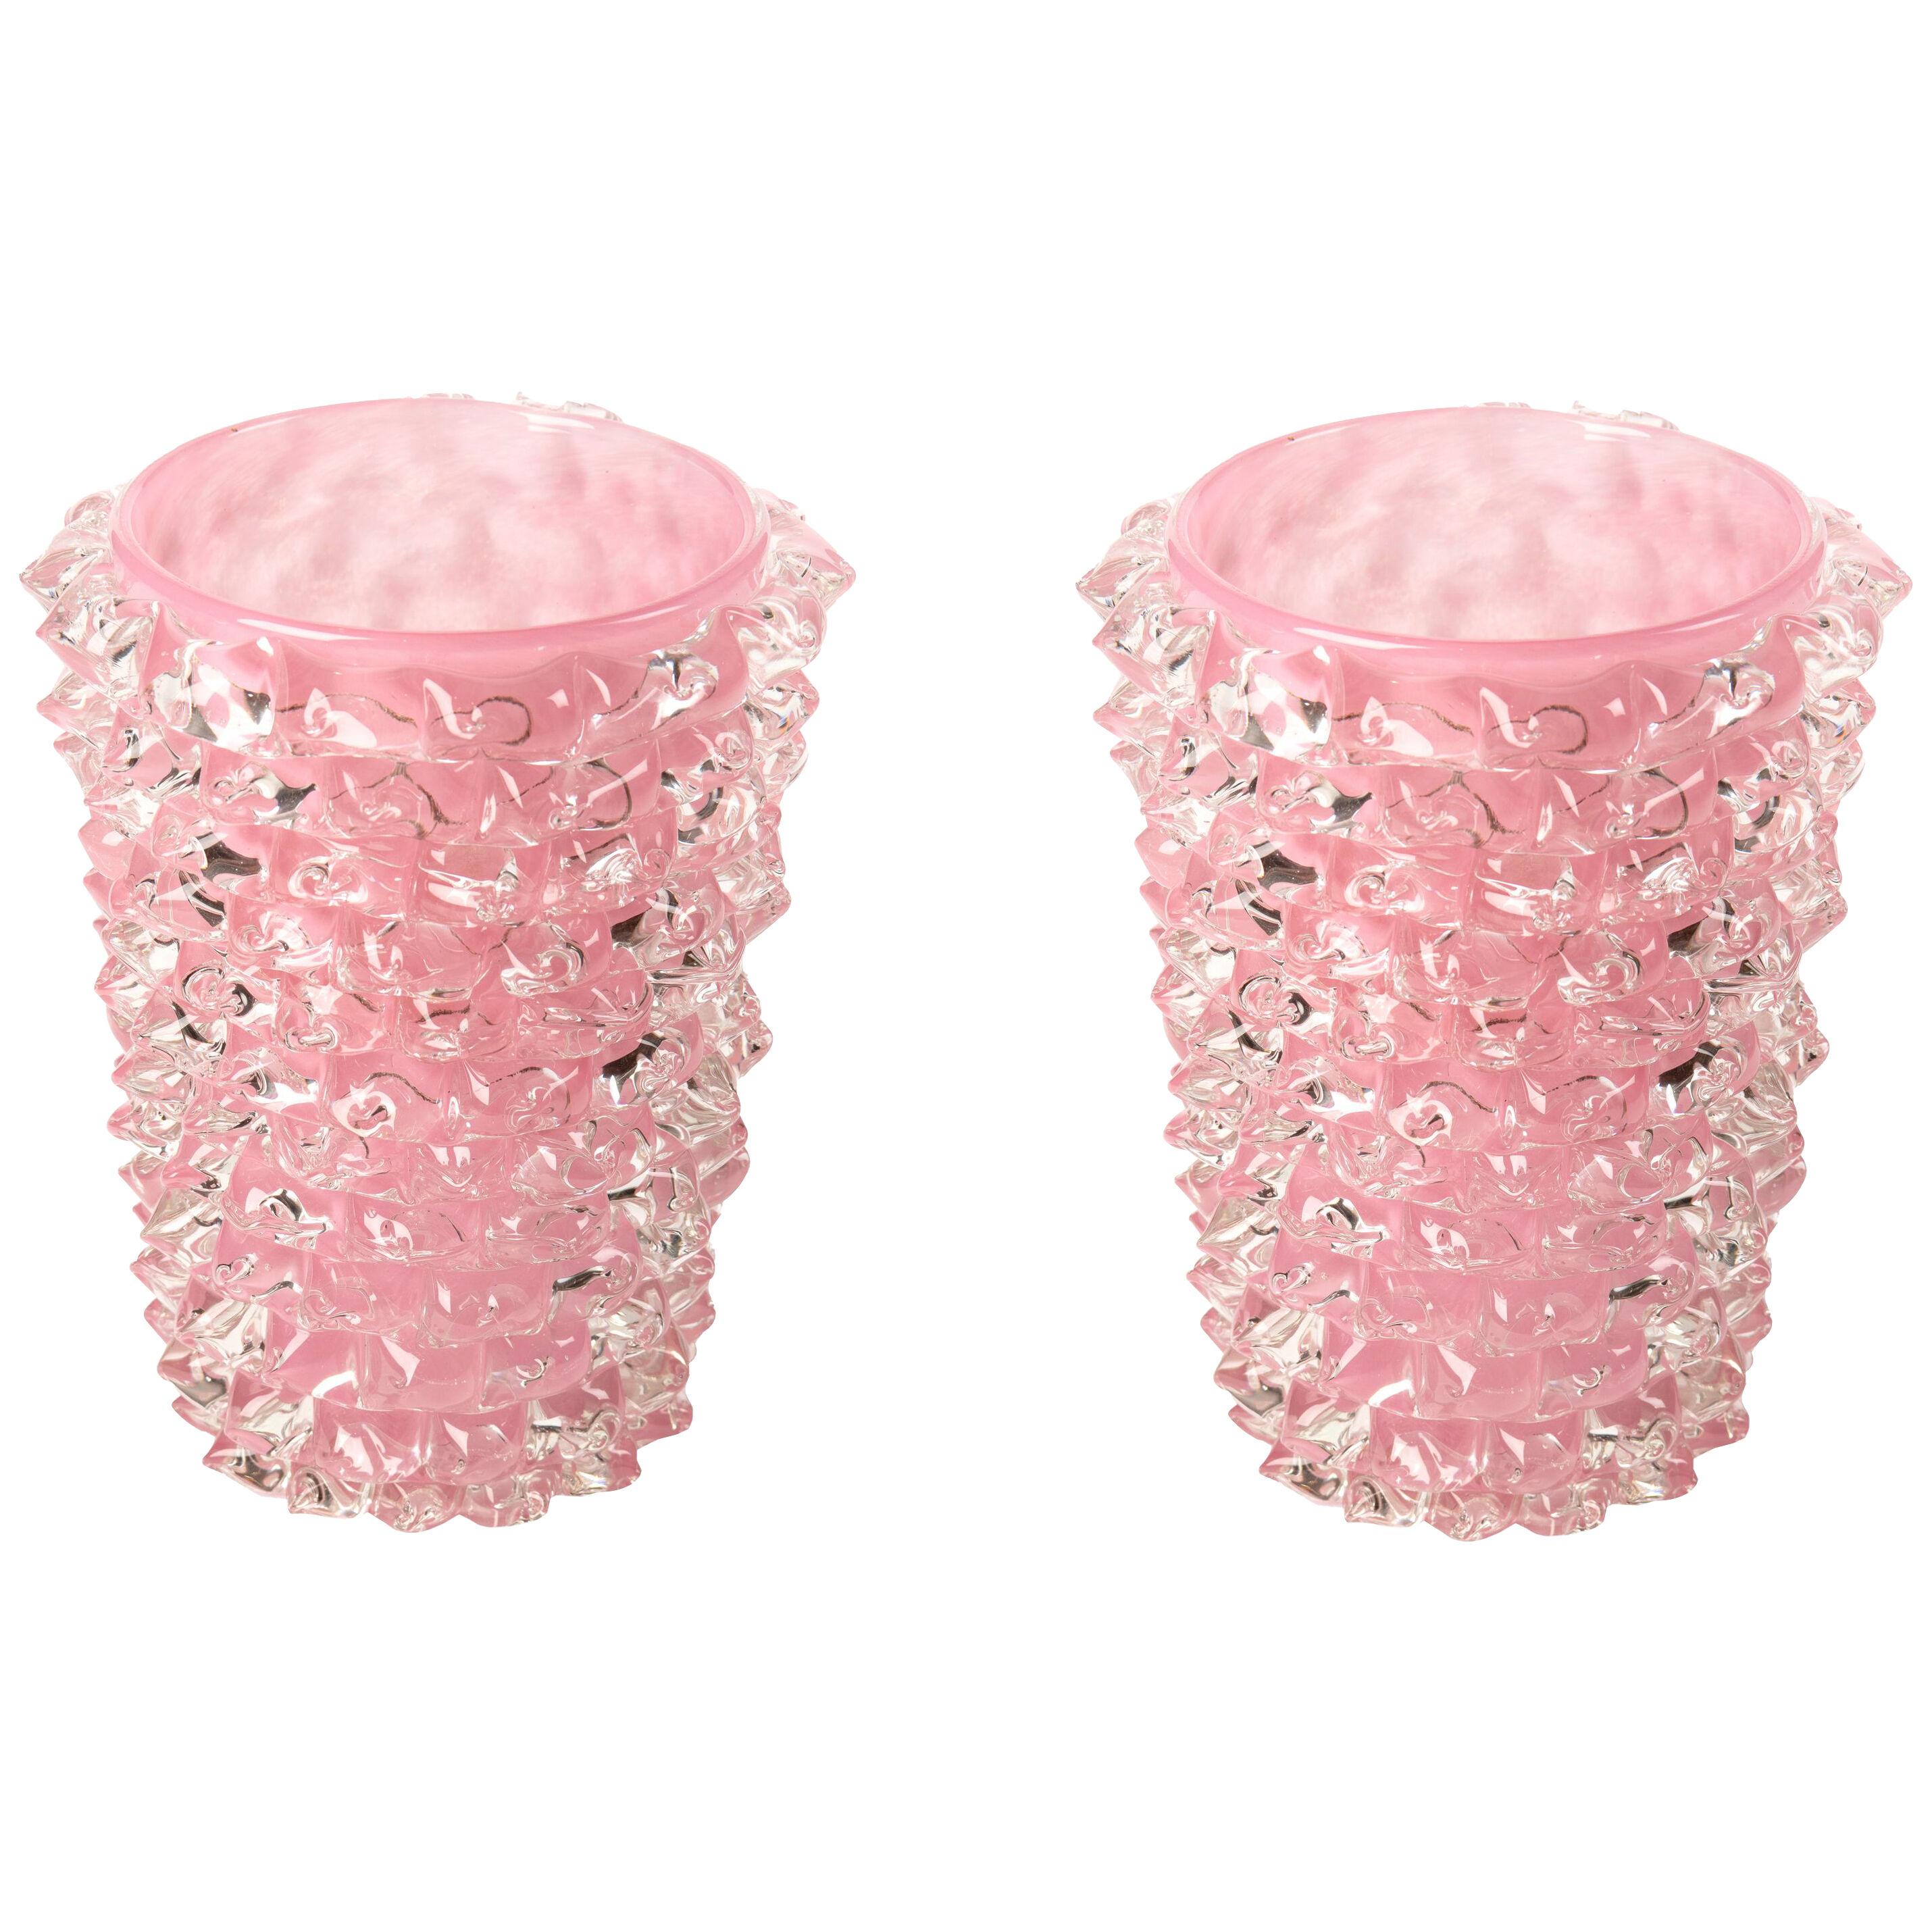 Pair of Pink Murano Glass Vases by Silvano Signoretto, Italy circa 2019